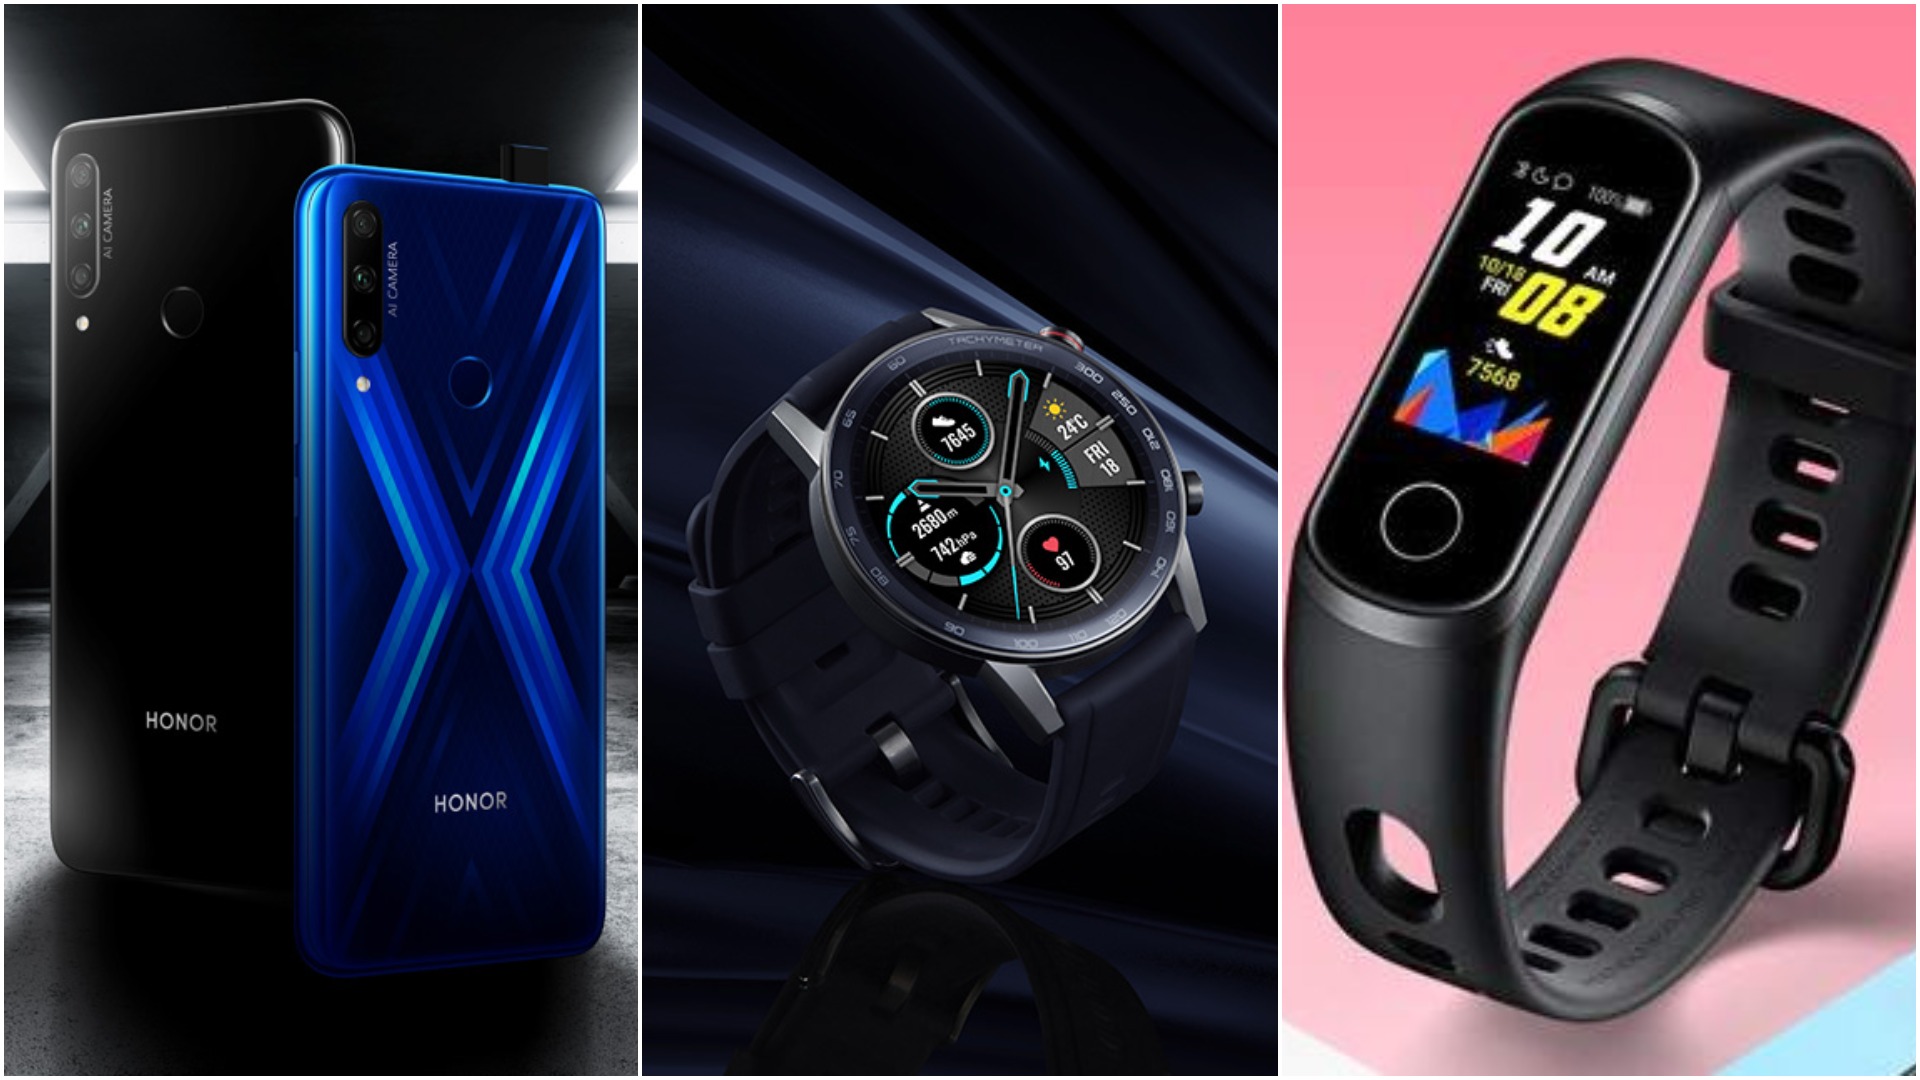 Honor 9X launched alongside MagicWatch 2, Band 5i fitness band in India